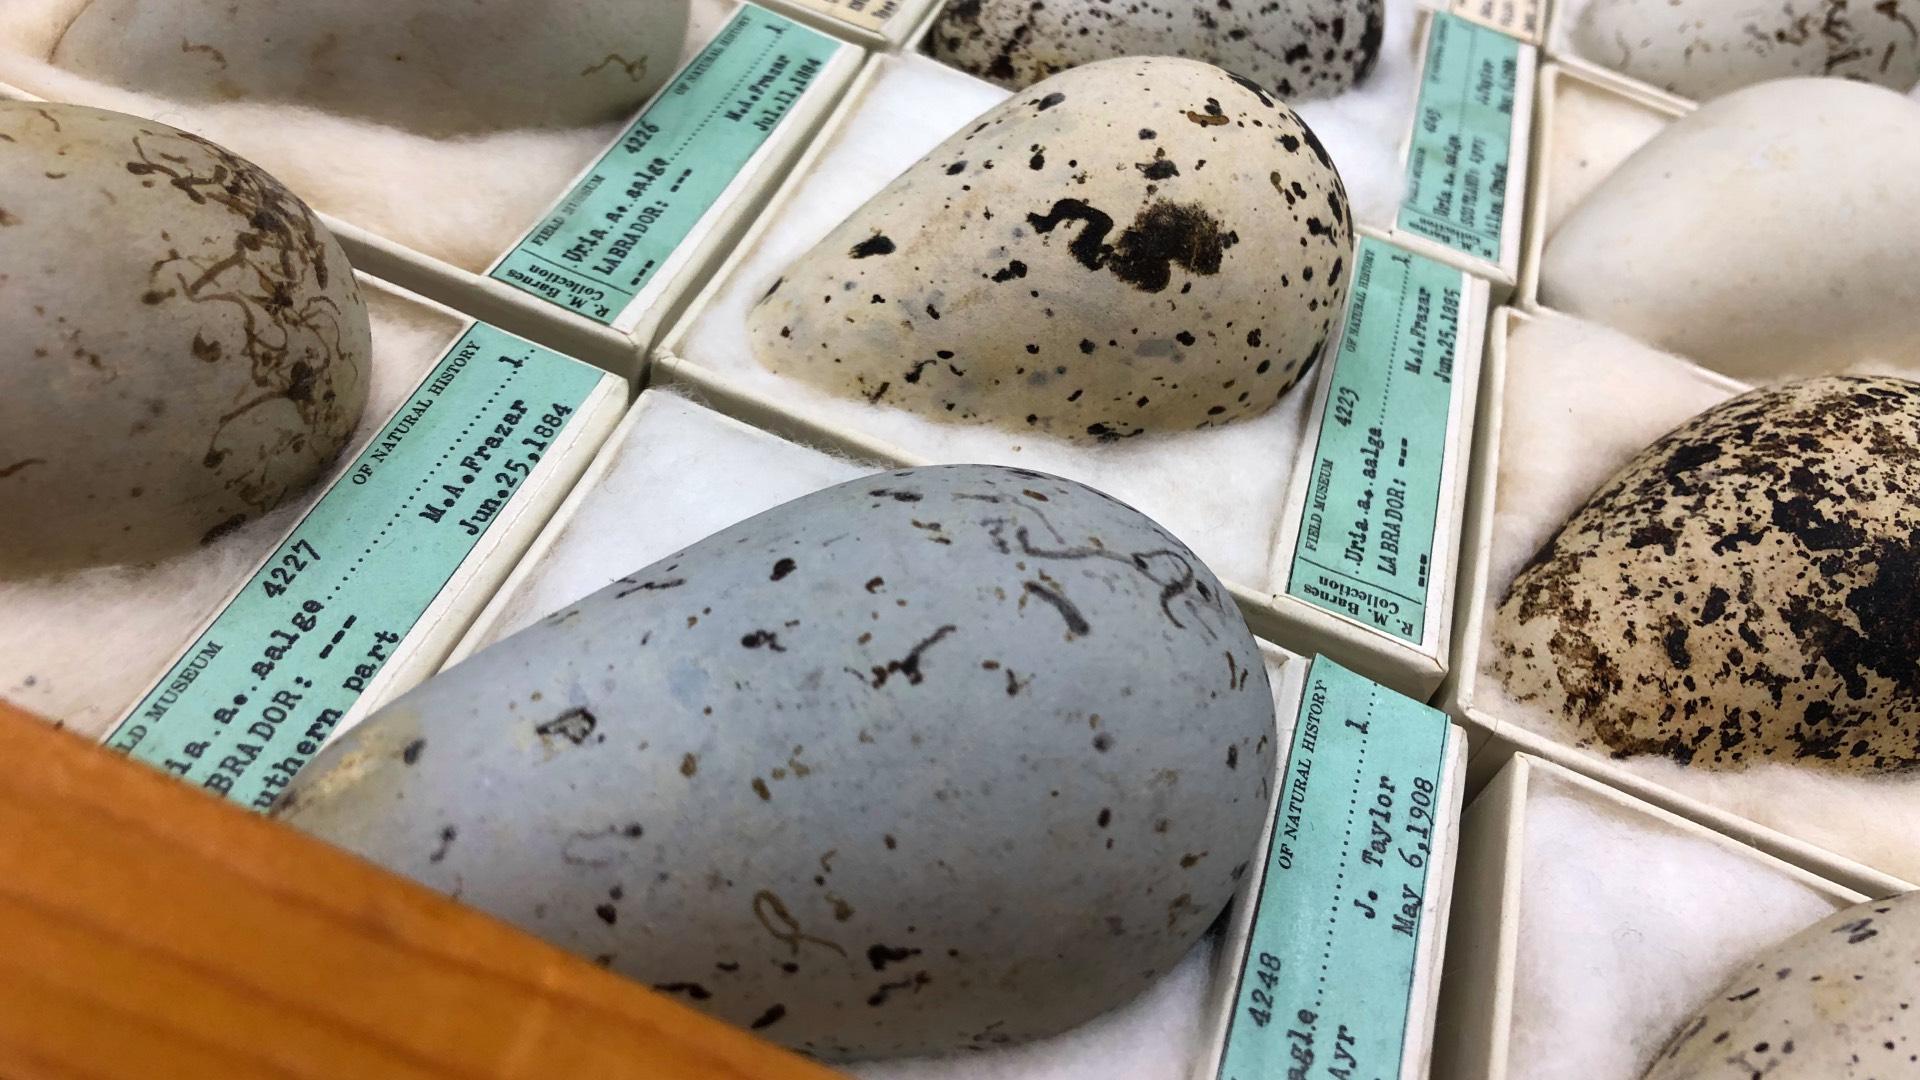 The Field Museum's historic egg collection is shedding new light on climate change. (Patty Wetli / WTTW News)